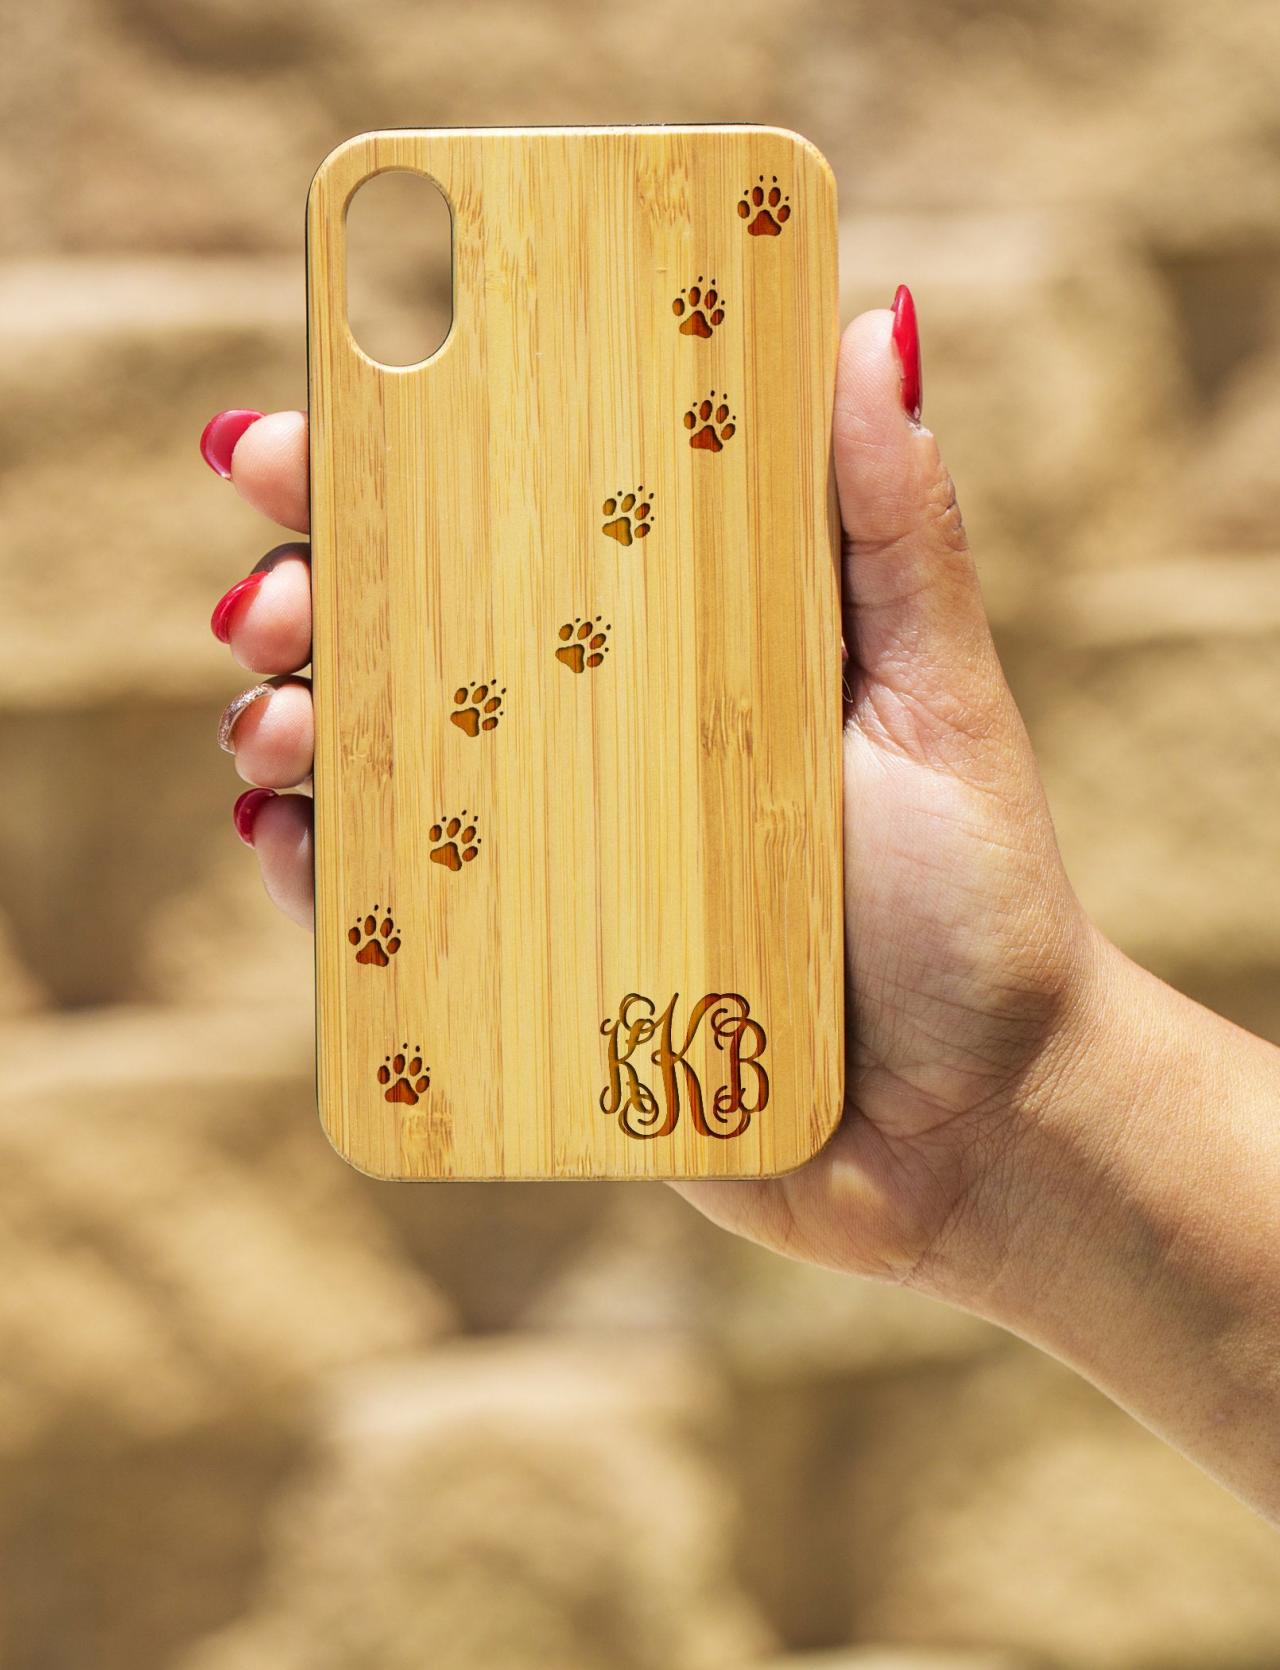 Dog Paw IPhone X Case, Engraved Iphone X case, Wooden Engraved Iphone X Case, Iphone case, Beautiful Gift for here, unique